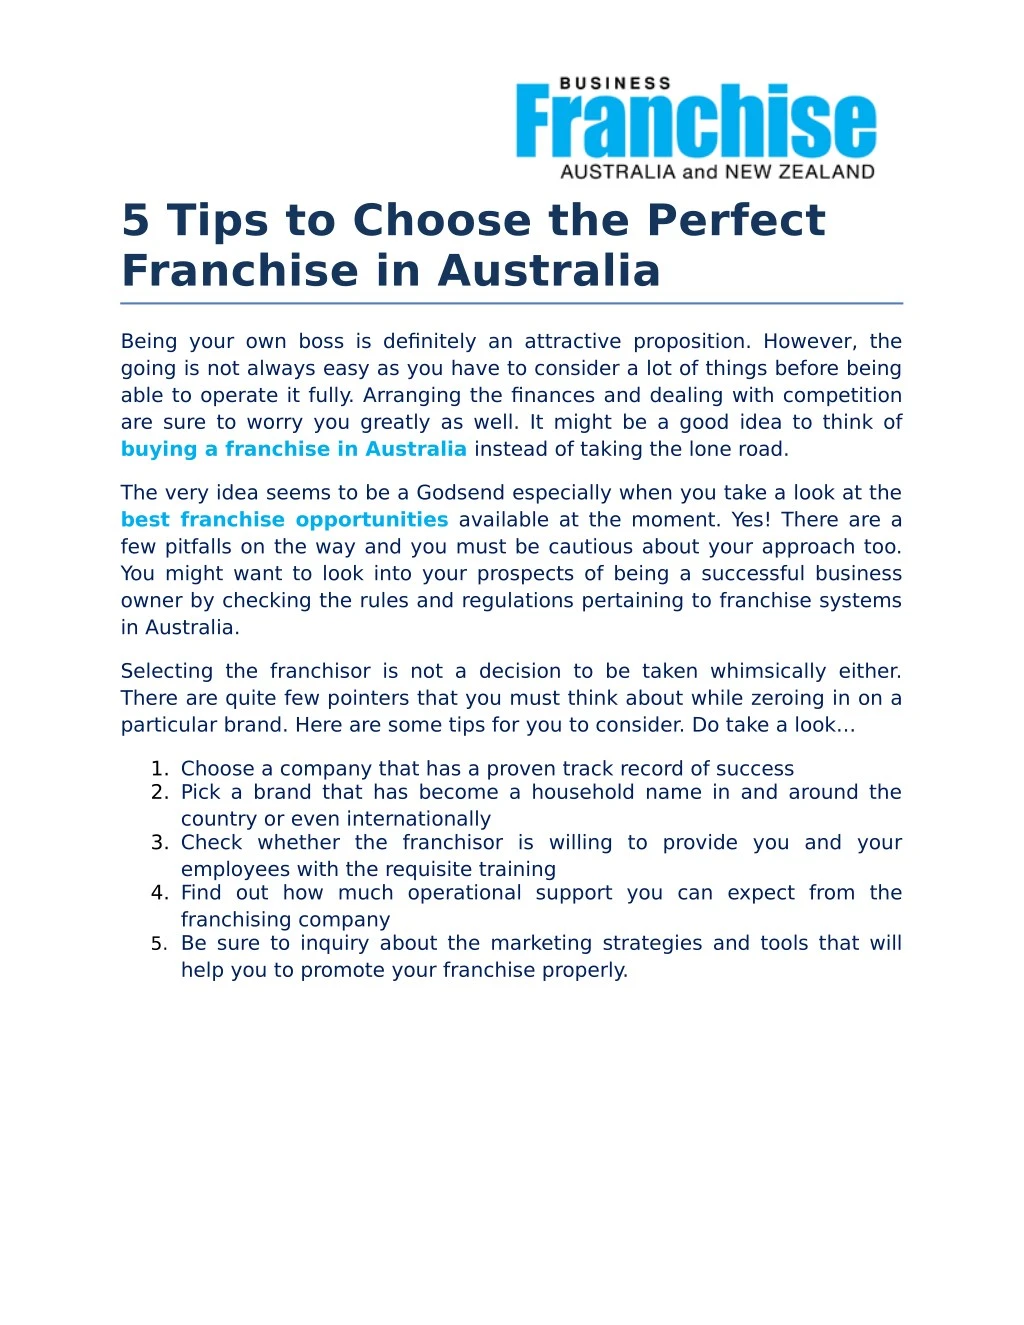 5 tips to choose the perfect franchise